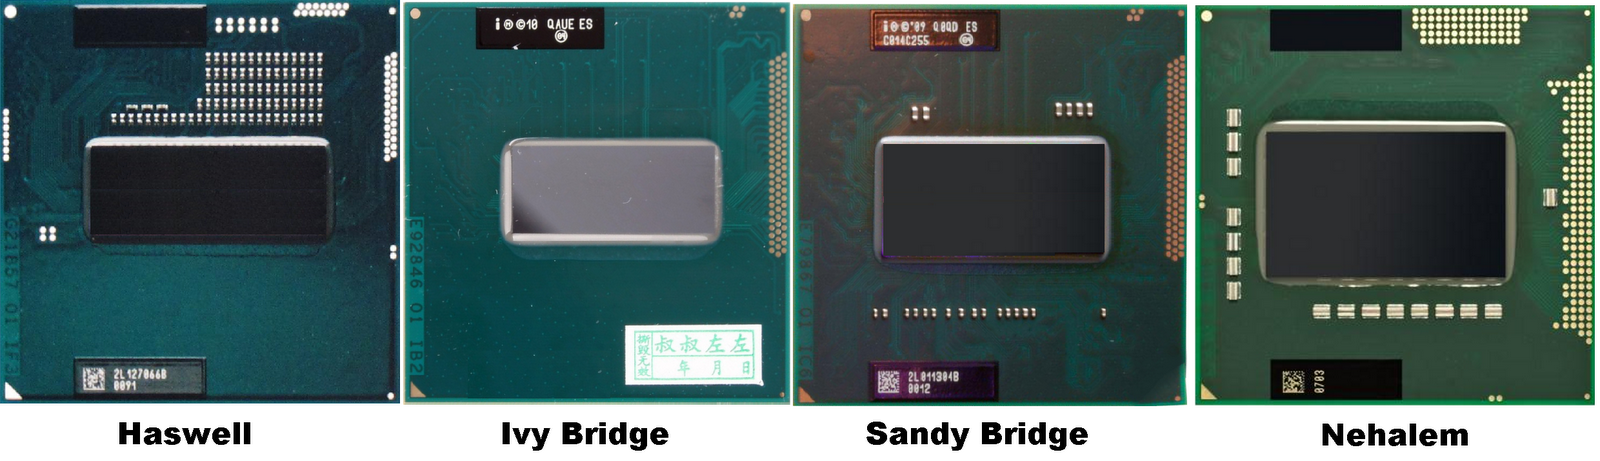 Intel-2013-Haswell-Processor-Reportedly-Pictured-3.png